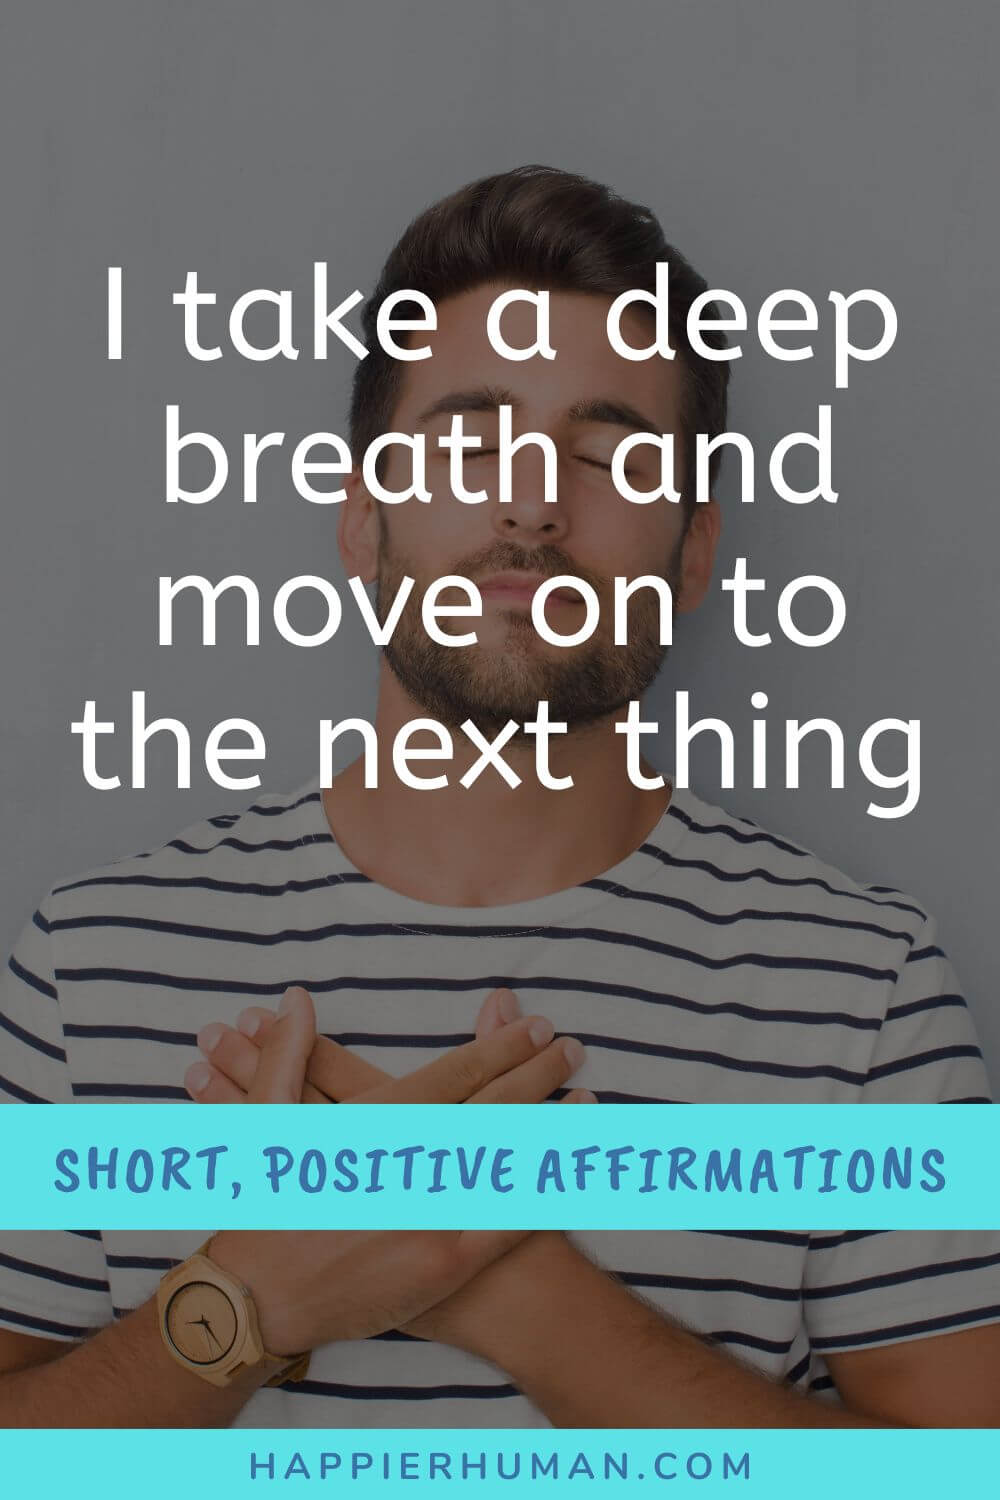 Short Positive Affirmations - I take a deep breath and move on to the next thing | short positive affirmations for work | positive affirmations for others | positive affirmations for women